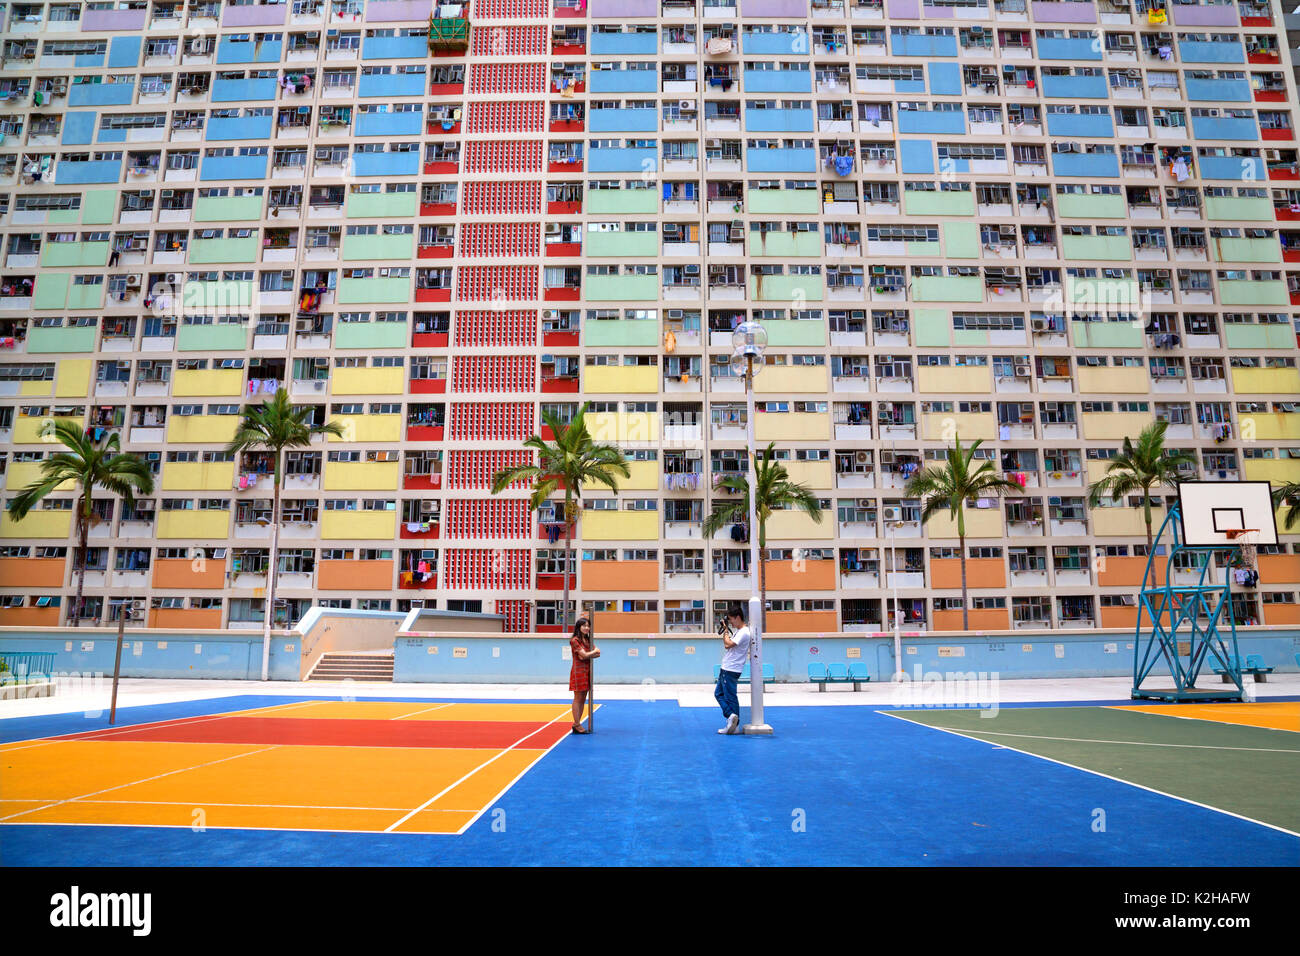 Choi Hung Estate in Hong Kong - vibrant and amazing architecture Stock Photo